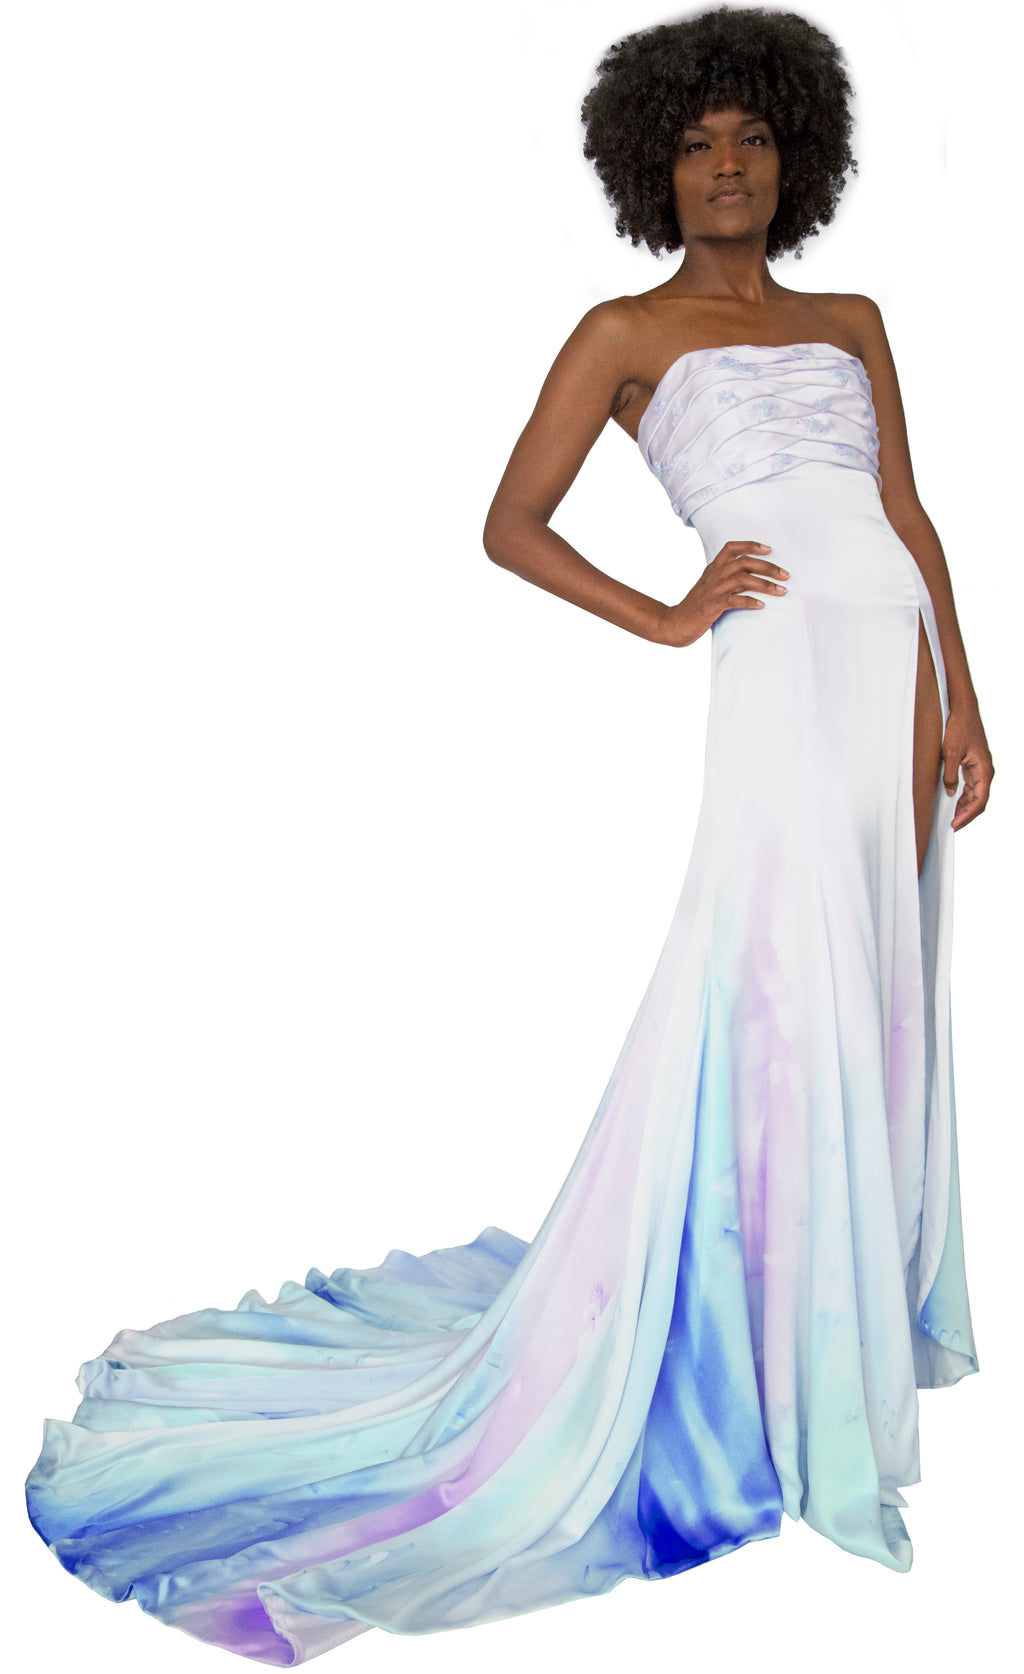 Lady of Verona Silk-Painted Gown with Ribbon Embroidery - KxLNewYork